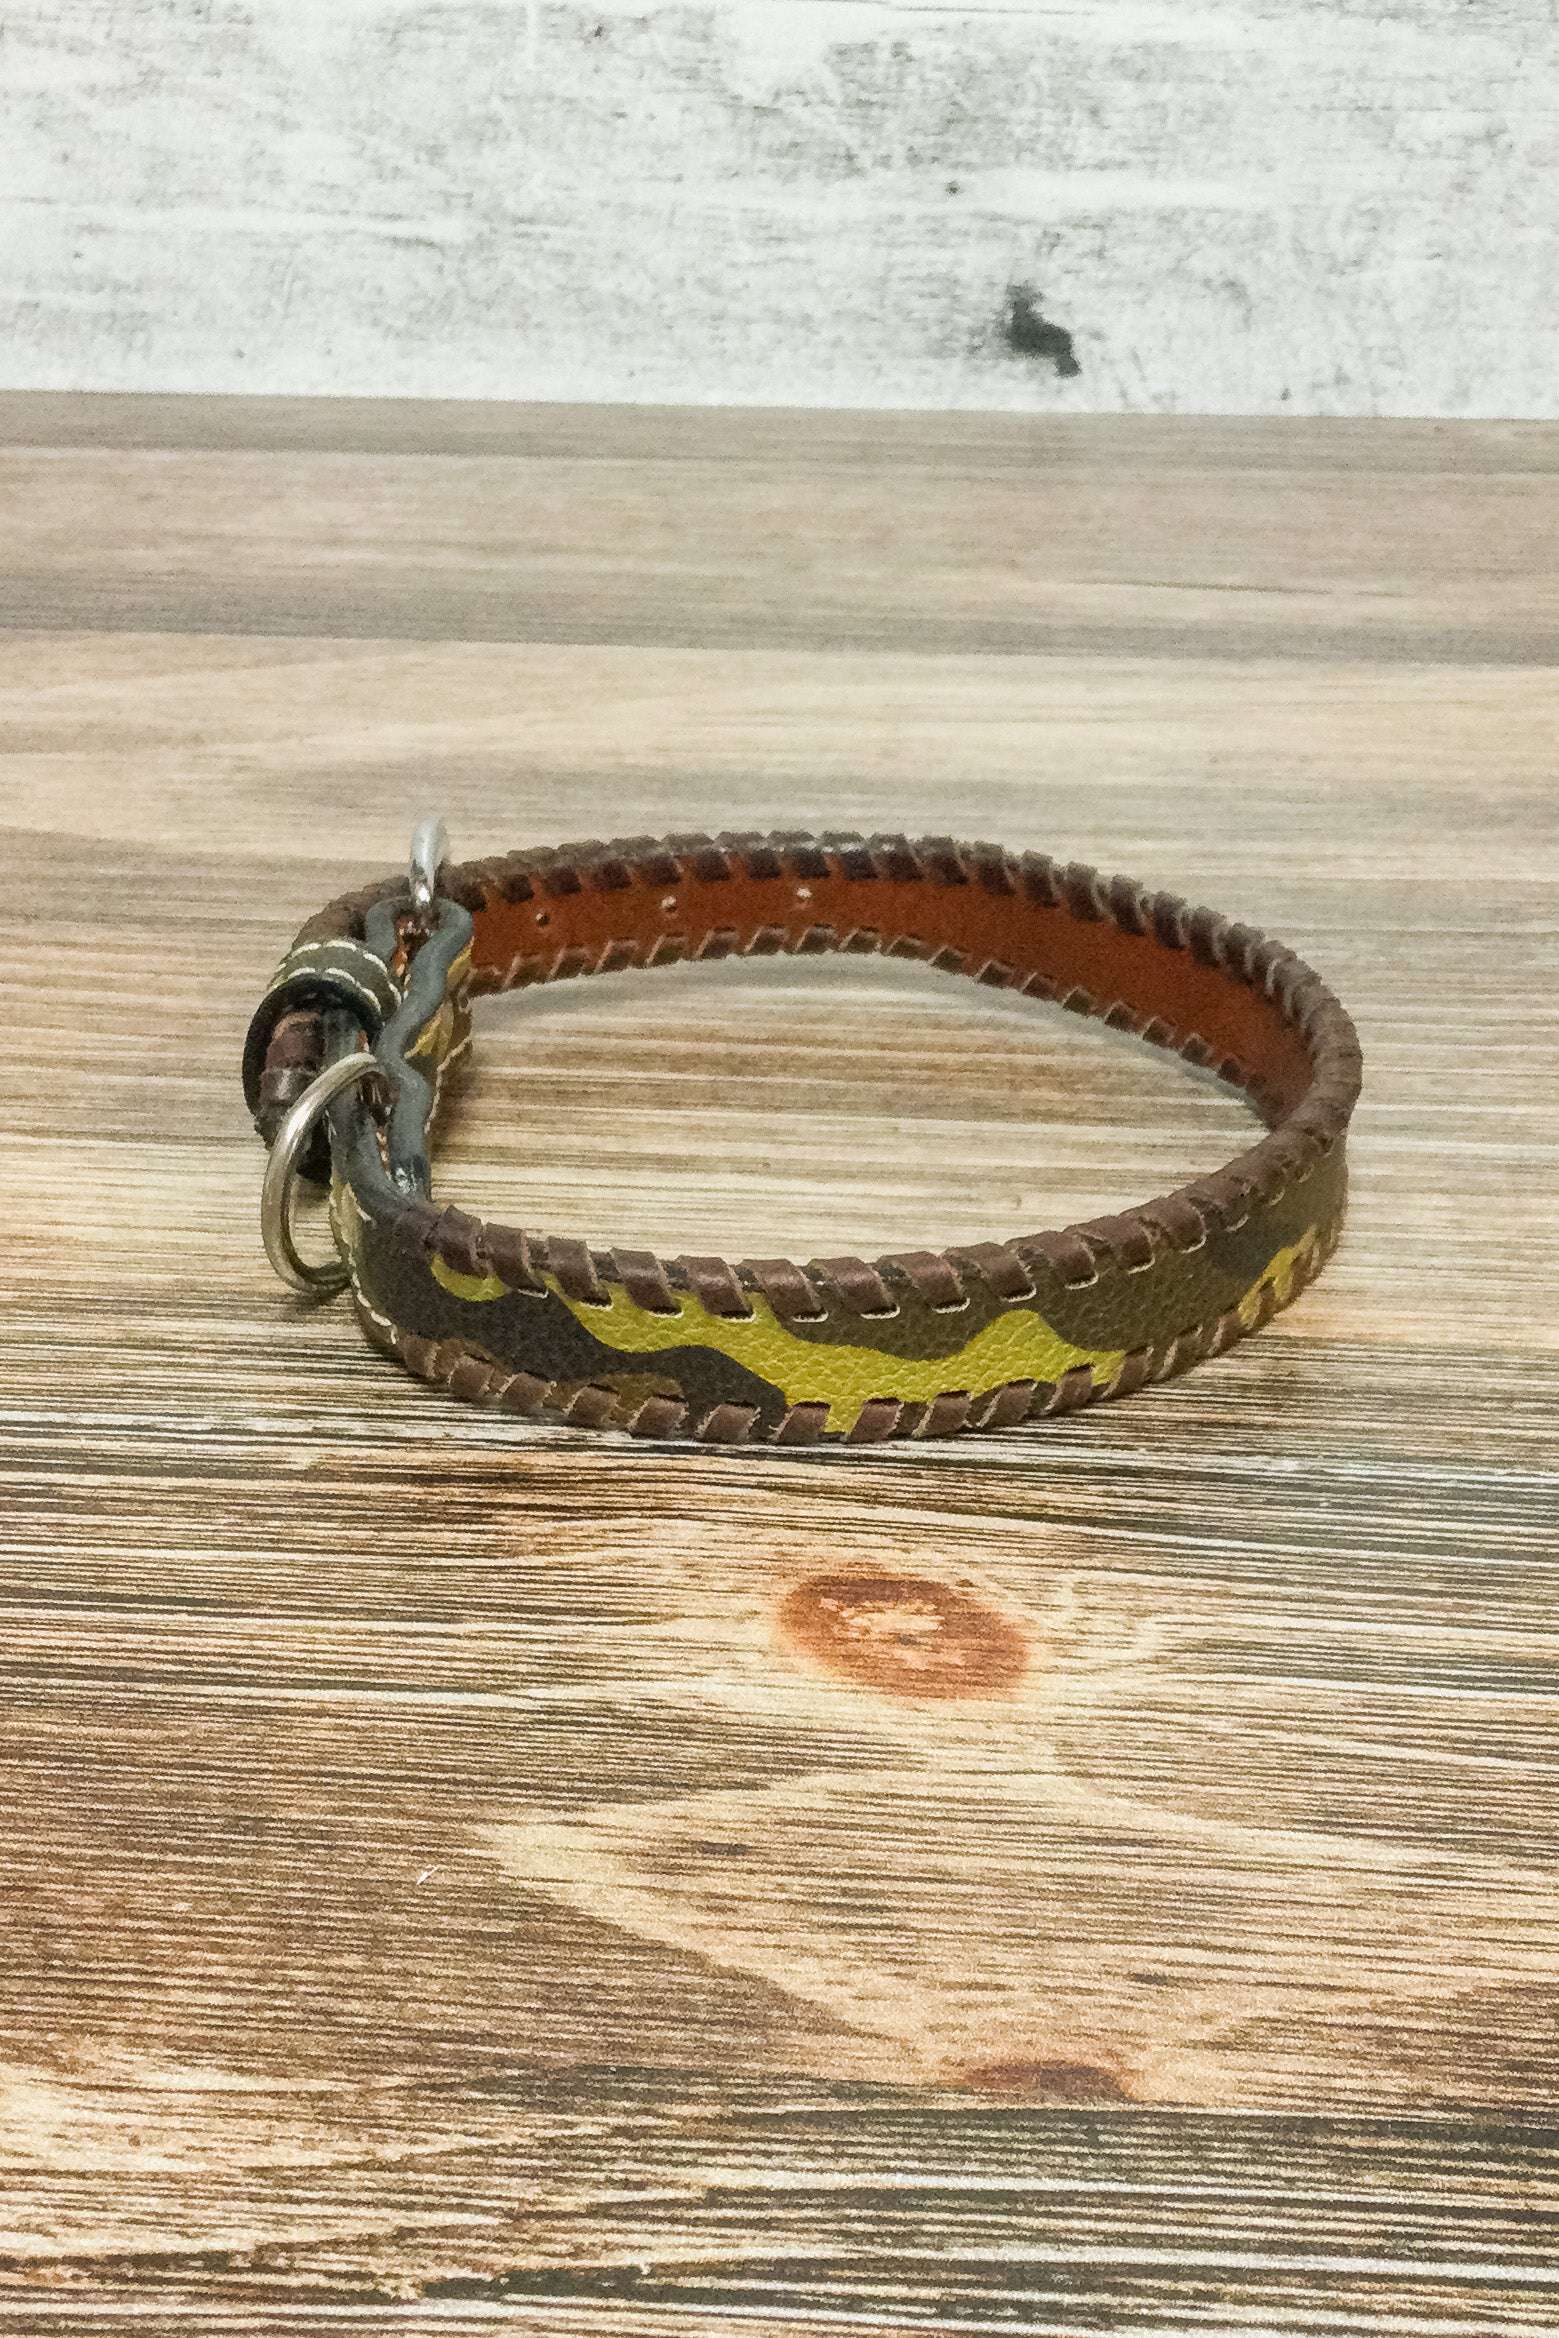 Rodeo Quincy Printed Leather Dog Collar - Camo - The Glamorous Cowgirl